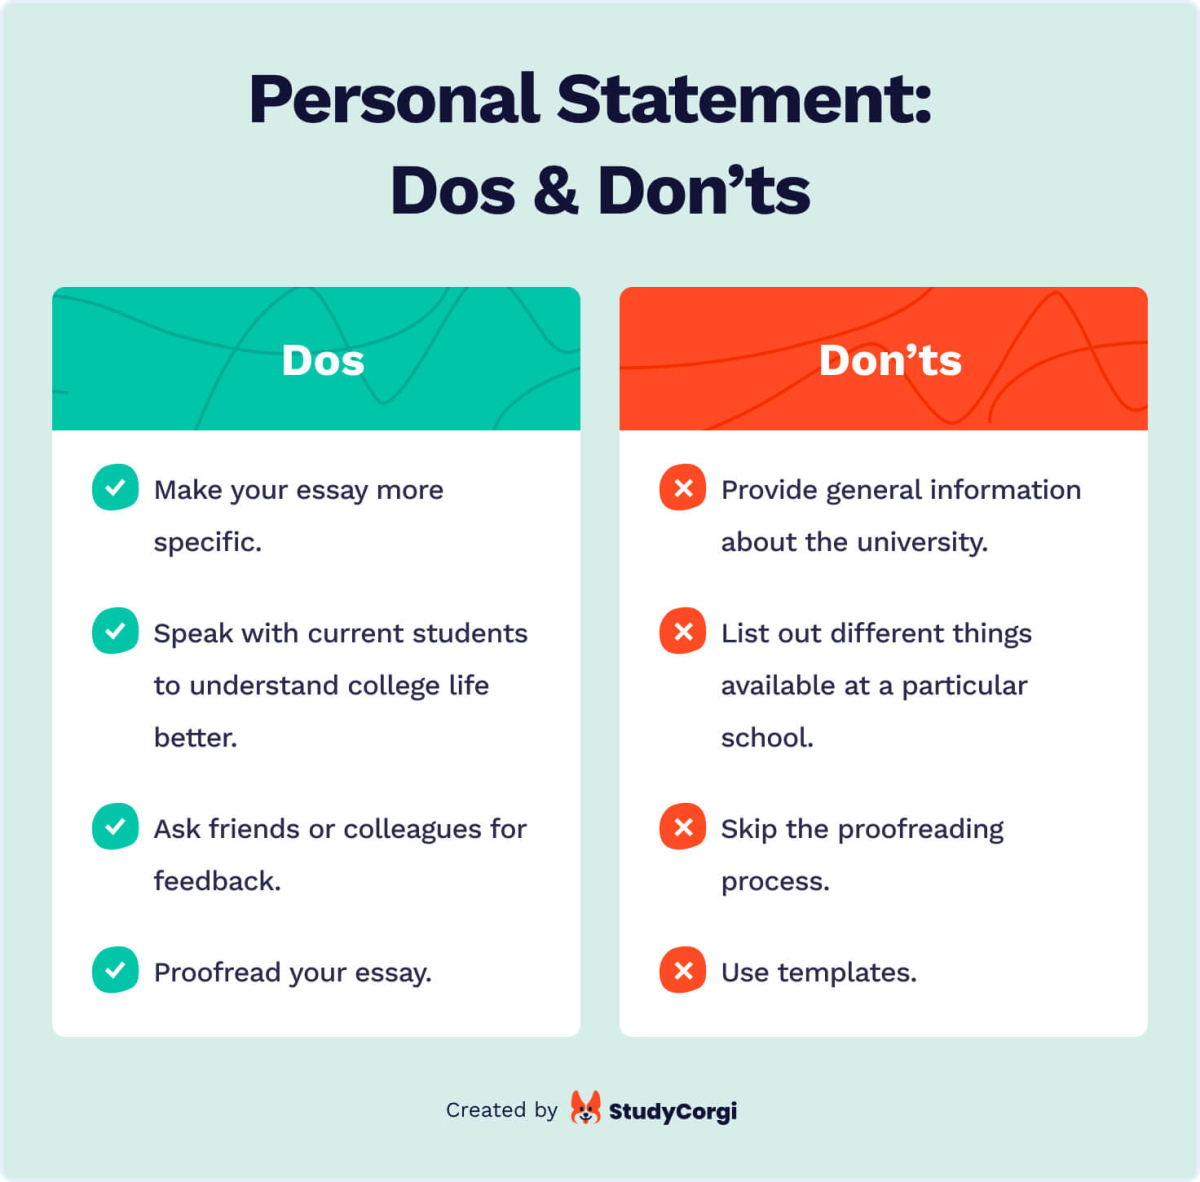 This image shows the dos and don'ts when writing a personal statement.